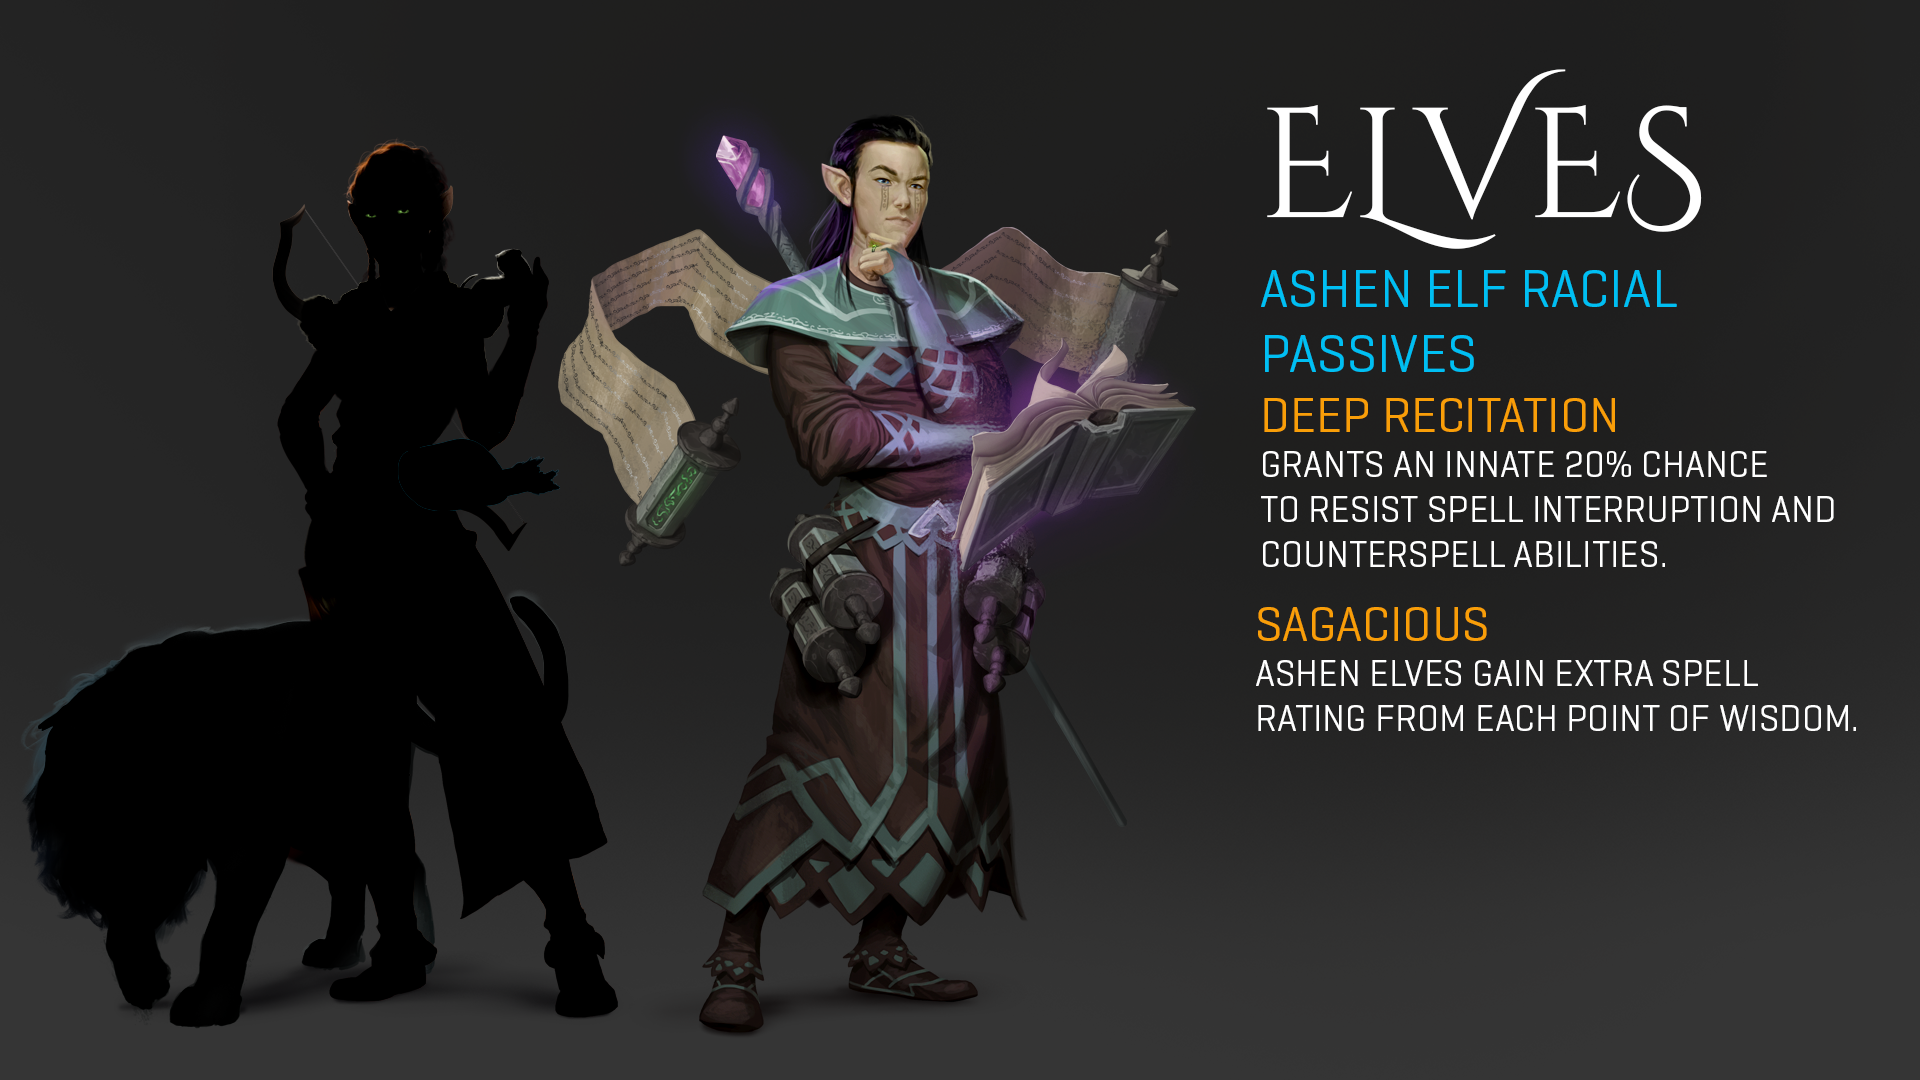 2019-Oct 30: Ashen Elf racial passives listed with concept art